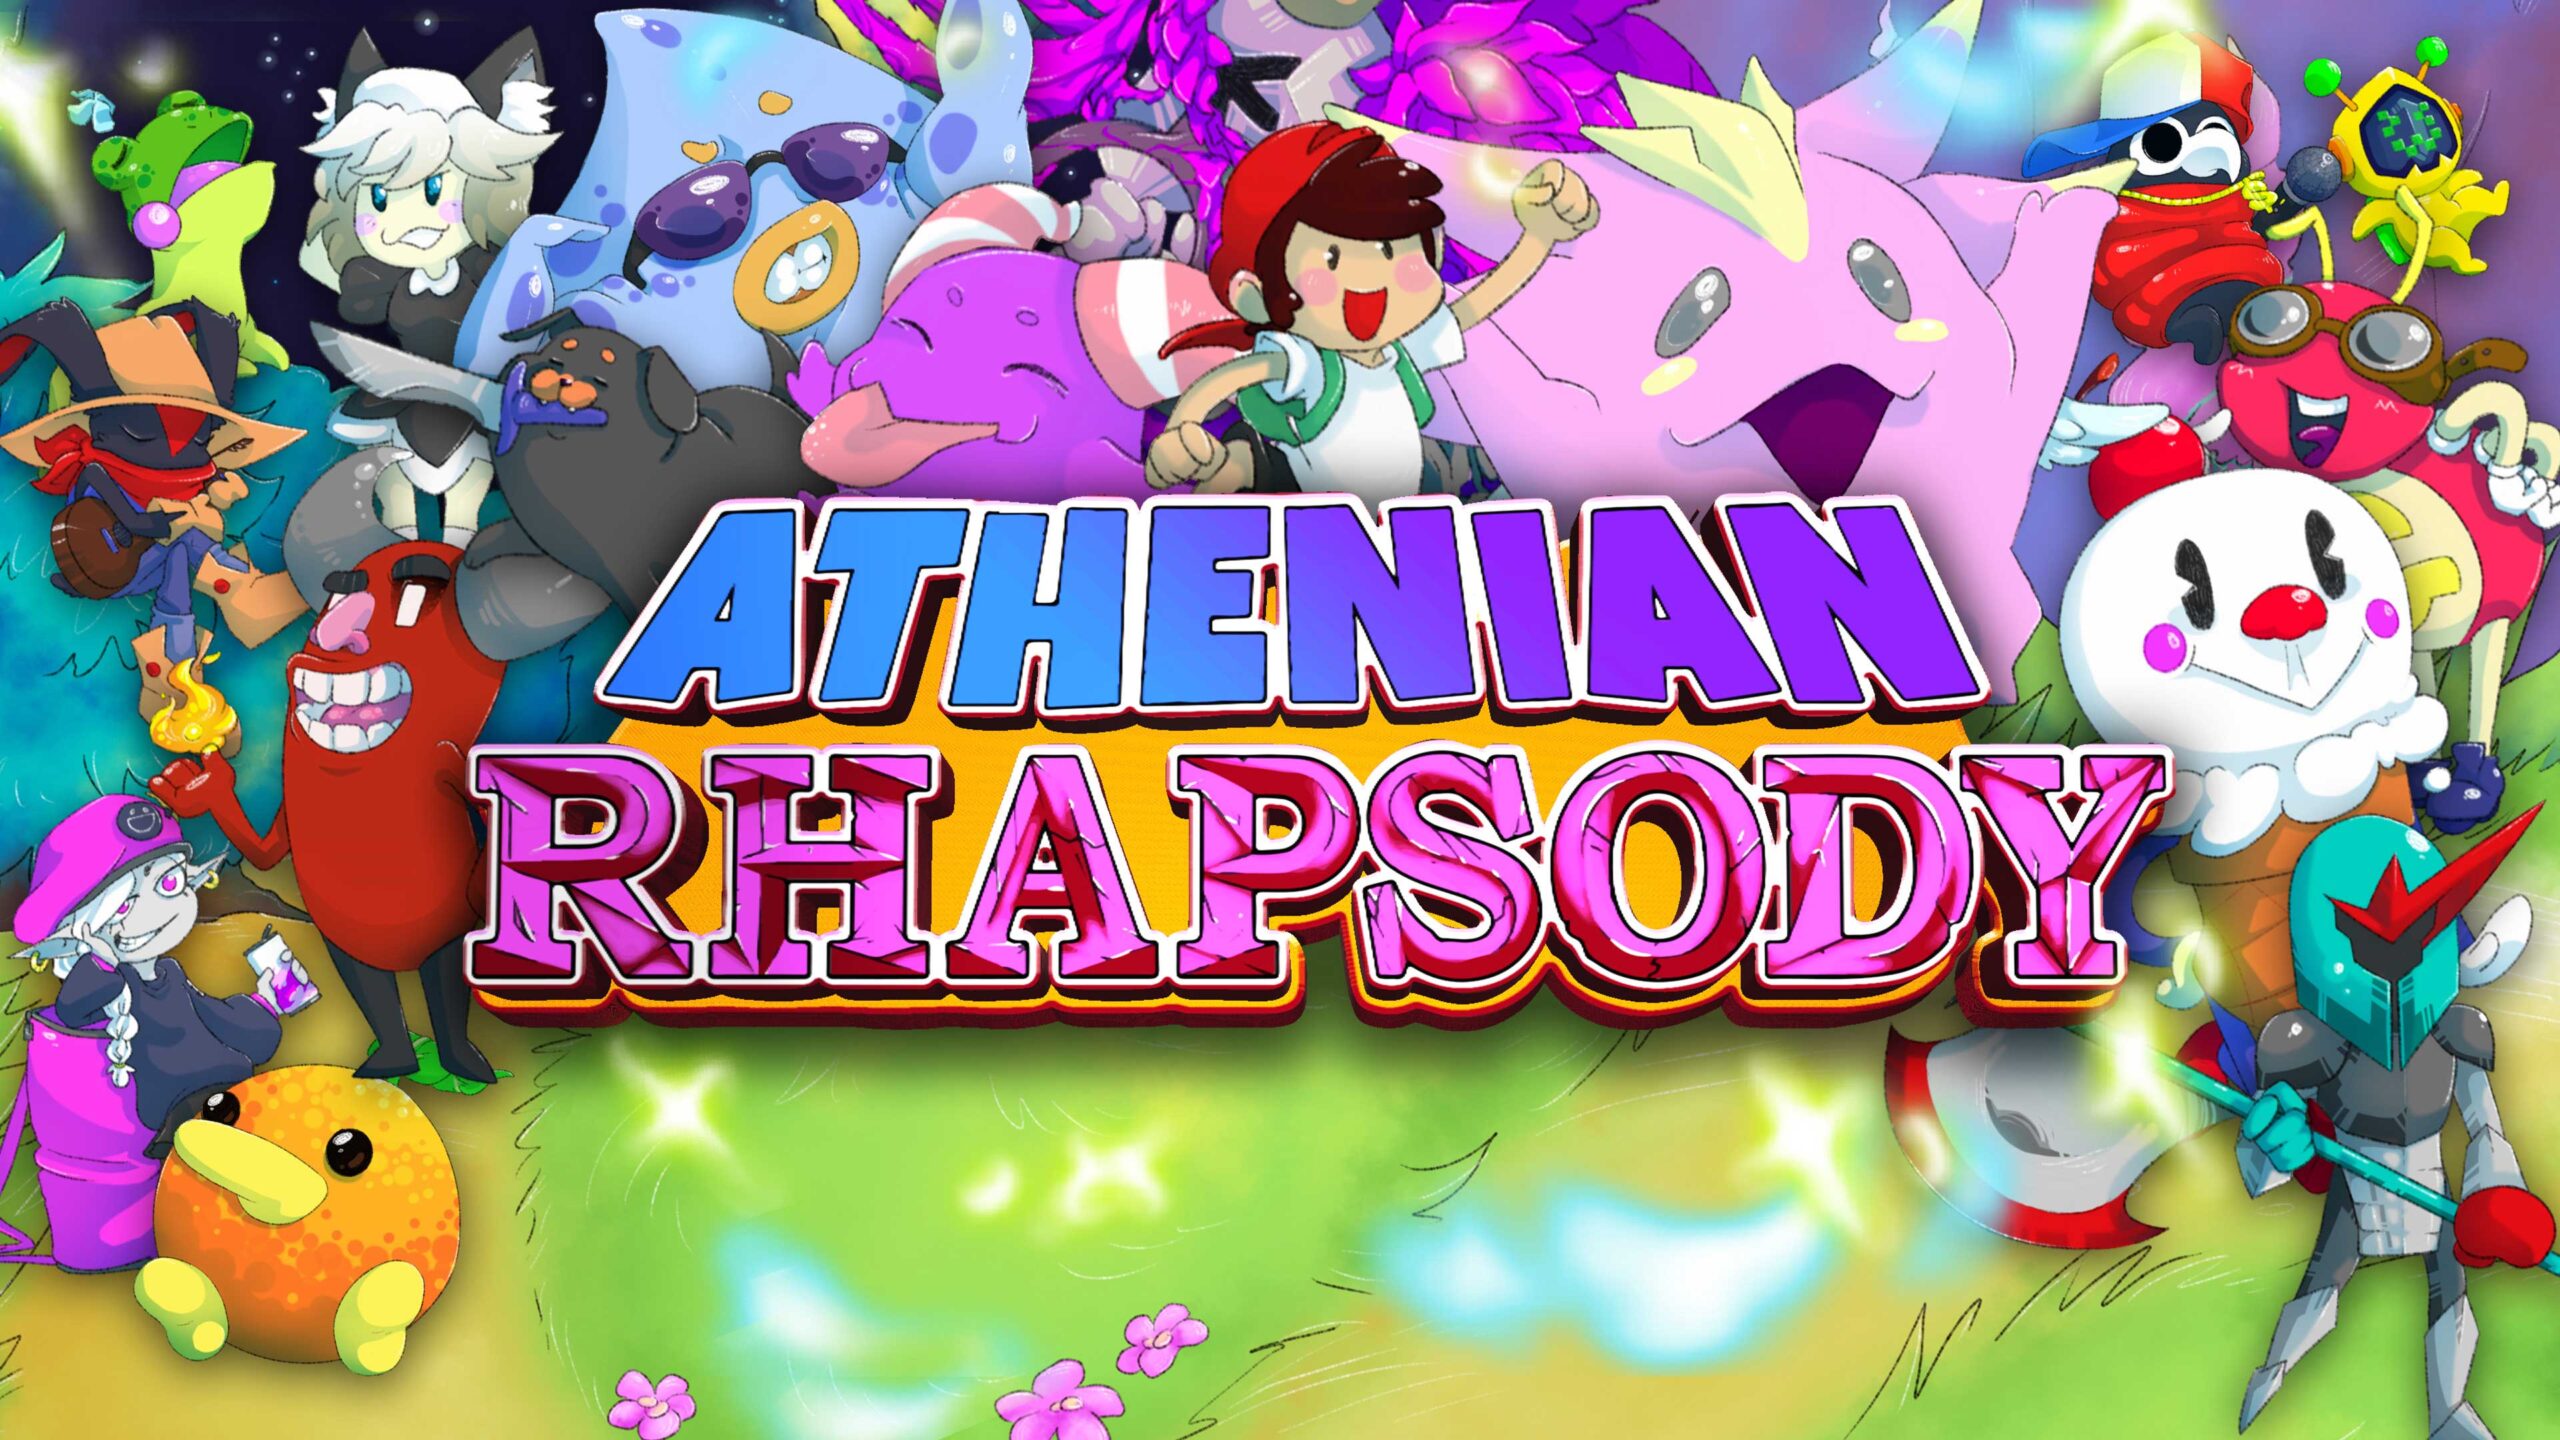 Athenian Rhapsody Brings Laughs, Community, and IBS